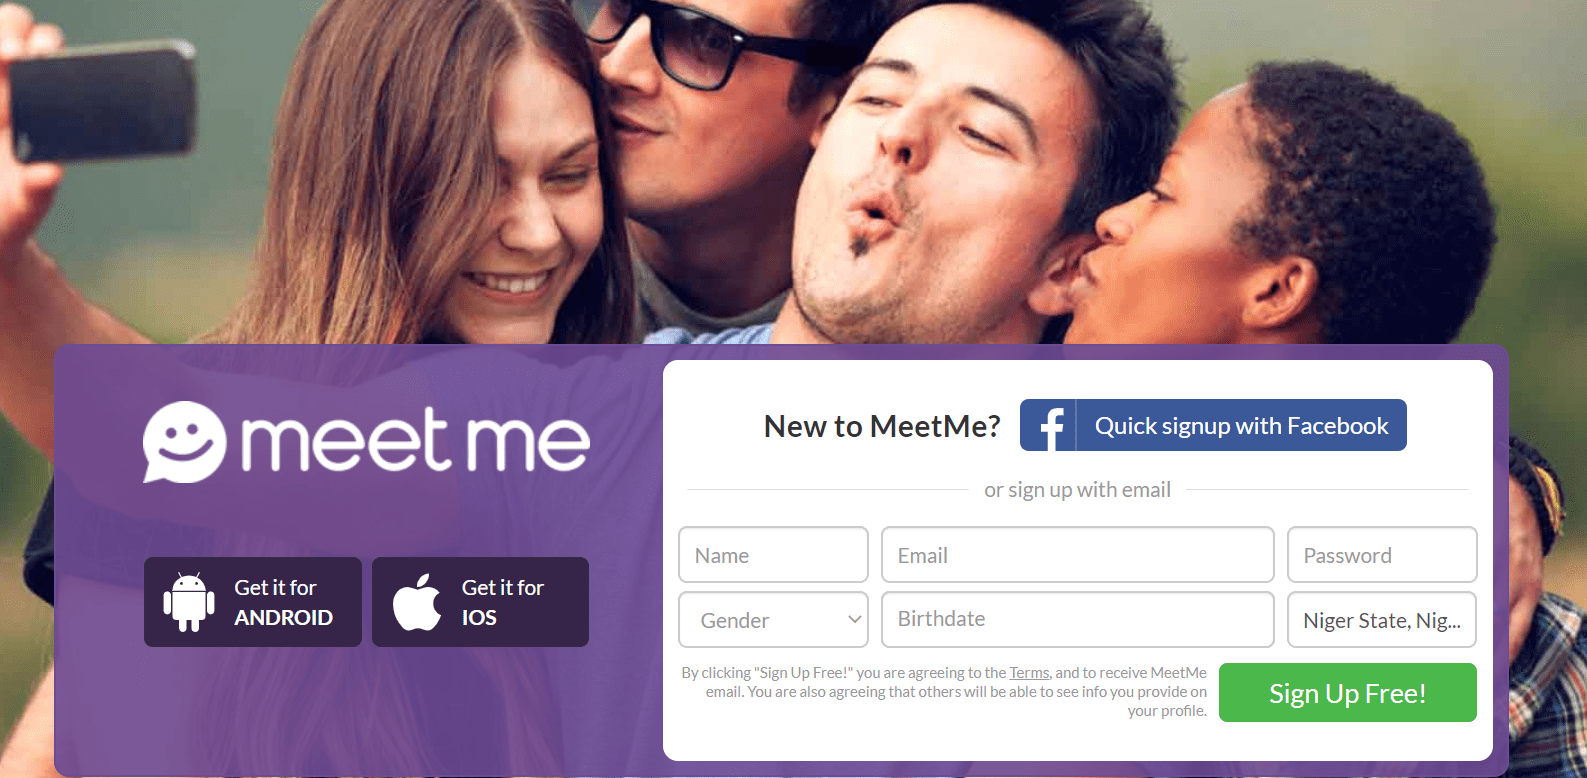 Then, click login. https://jiganet.com/login-to-meetme-or-sign-up-for-a-mee...